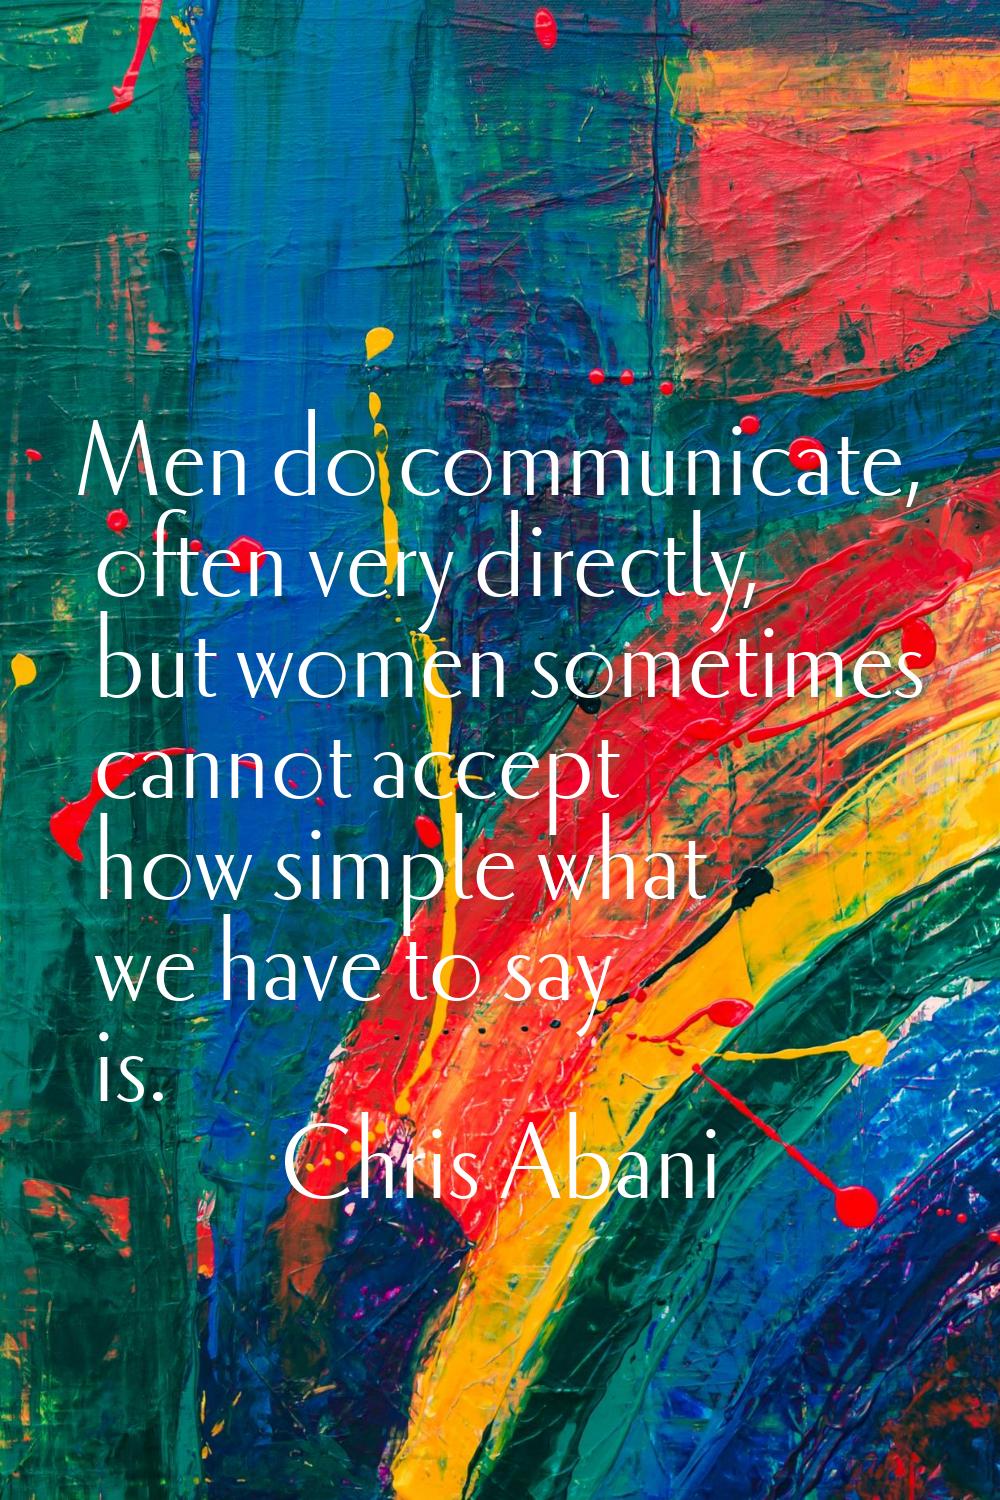 Men do communicate, often very directly, but women sometimes cannot accept how simple what we have 